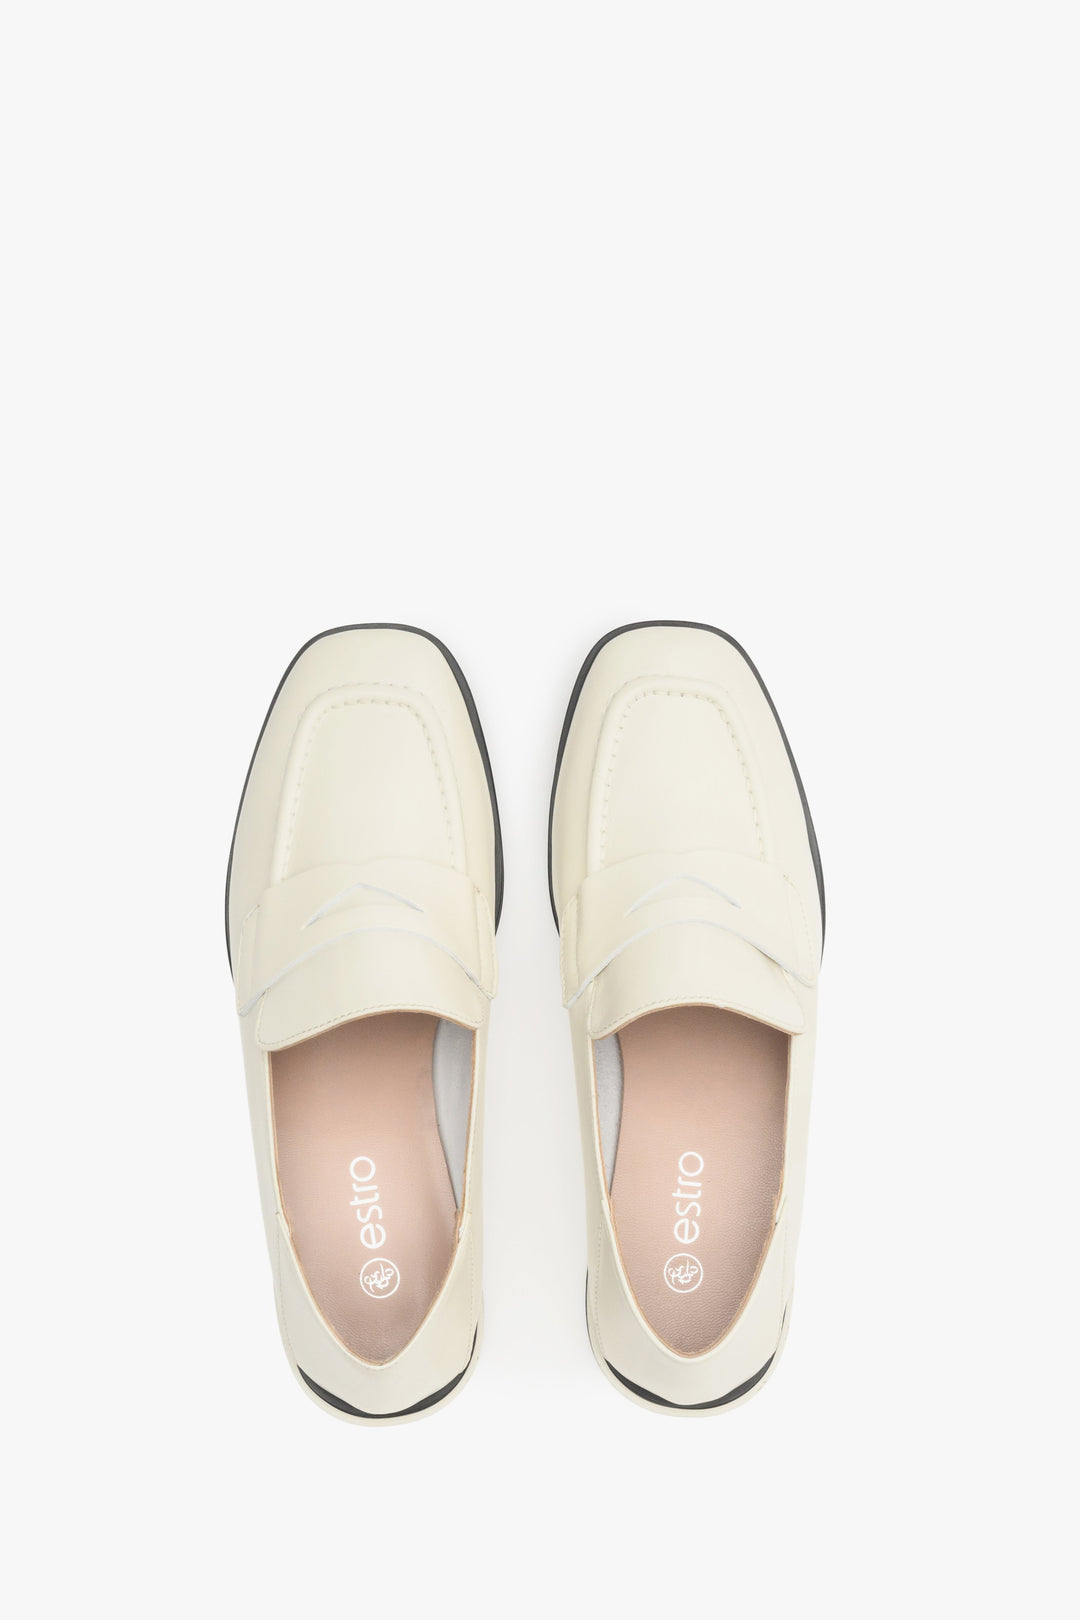 Women's white loafers made of genuine leather by Estro - top view shoe presentation.